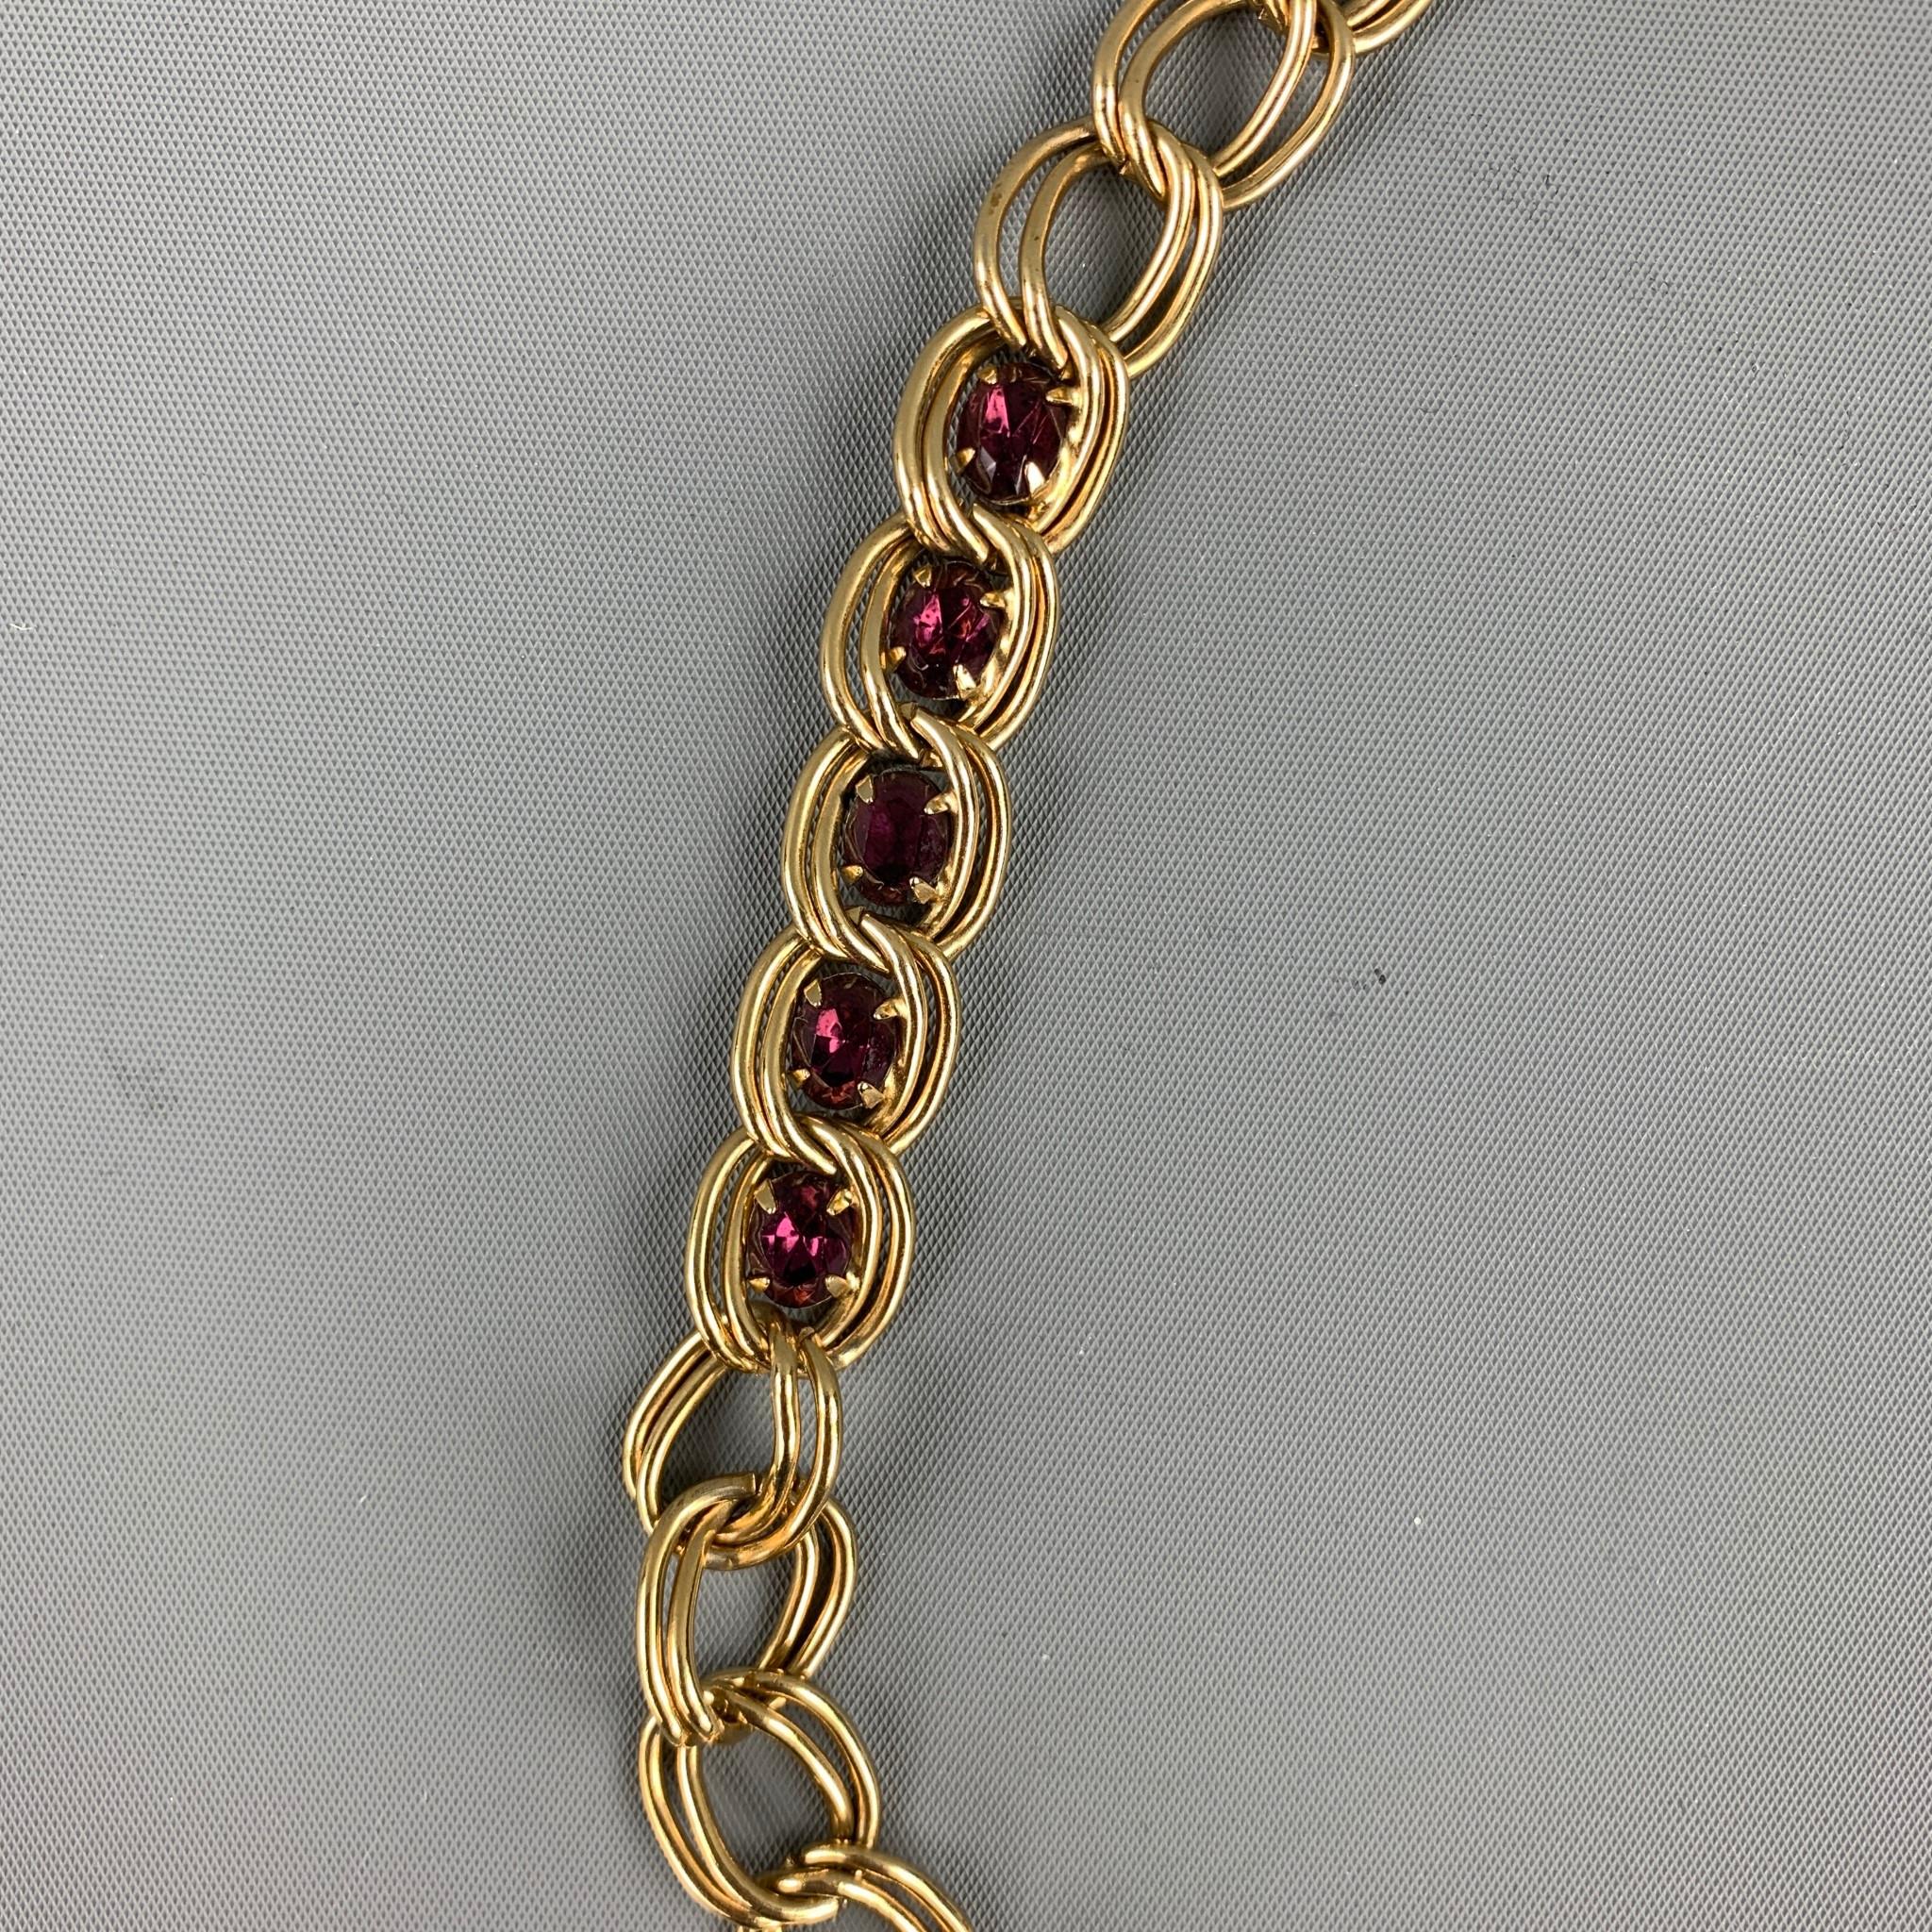 GIVENCHY necklace comes in a gold tone chain link with purple stones featuring a snap clasp closure. 

Very Good Pre-Owned Condition.

Measurements:

Length: 28 in.